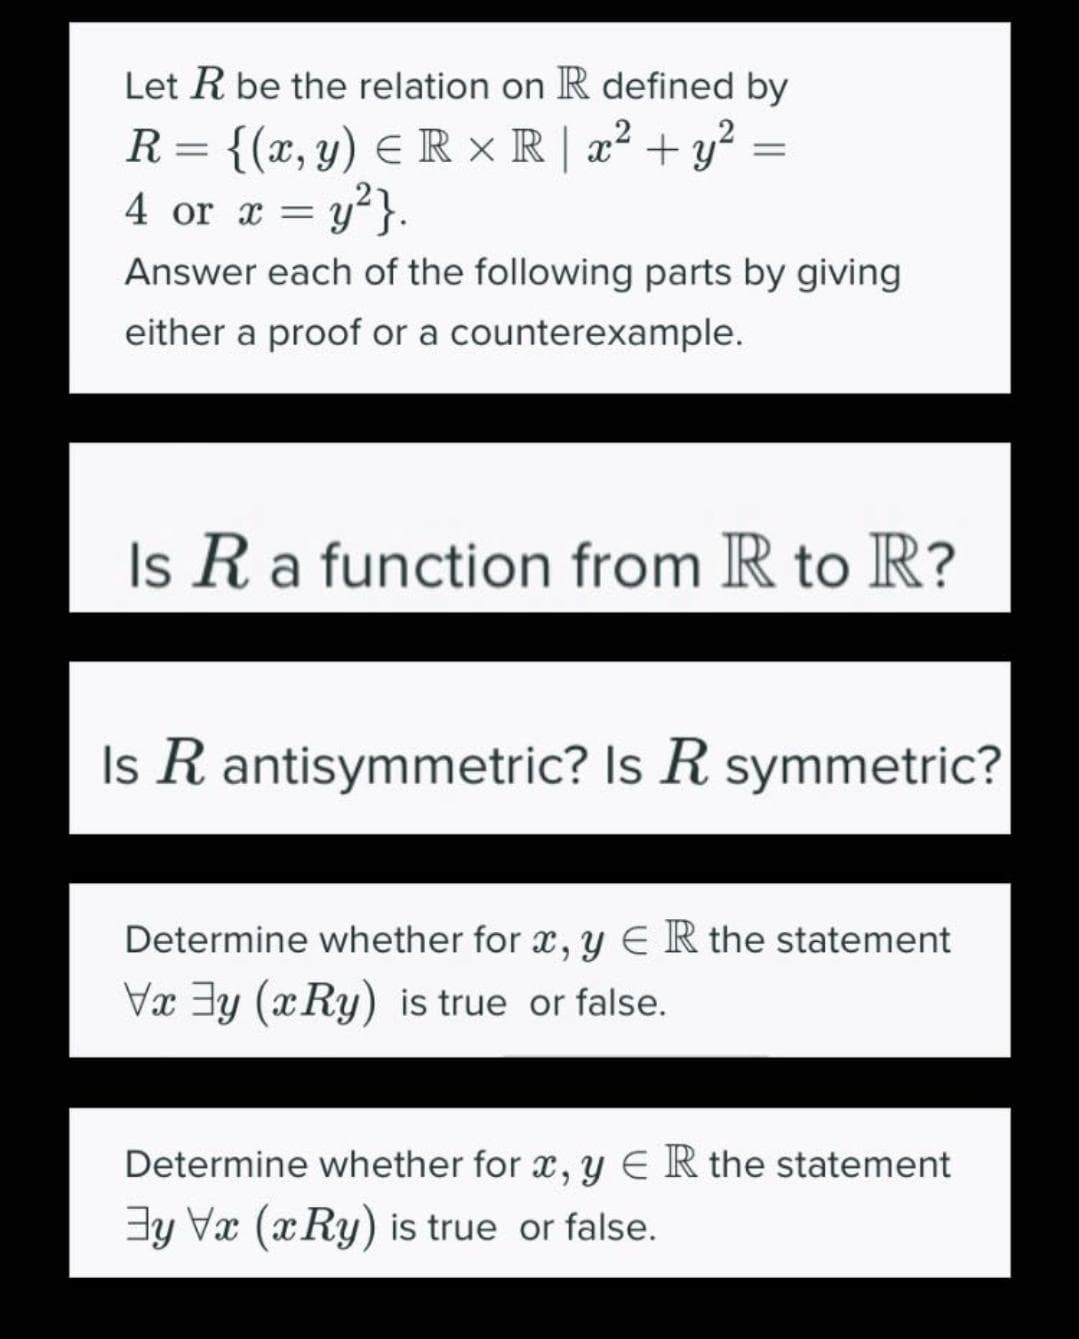 Let R be the relation on R defined by
R= {(x, y) E R × R | x² + y²
4 or x = y}.
Answer each of the following parts by giving
either a proof or a counterexample.
Is R a function from R to R?
Is R antisymmetric? Is R symmetric?
Determine whether for x, y E R the statement
Vx 3y (xRy) is true or false.
Determine whether for x, y E R the statement
3y Va (xRy) is true or false.
